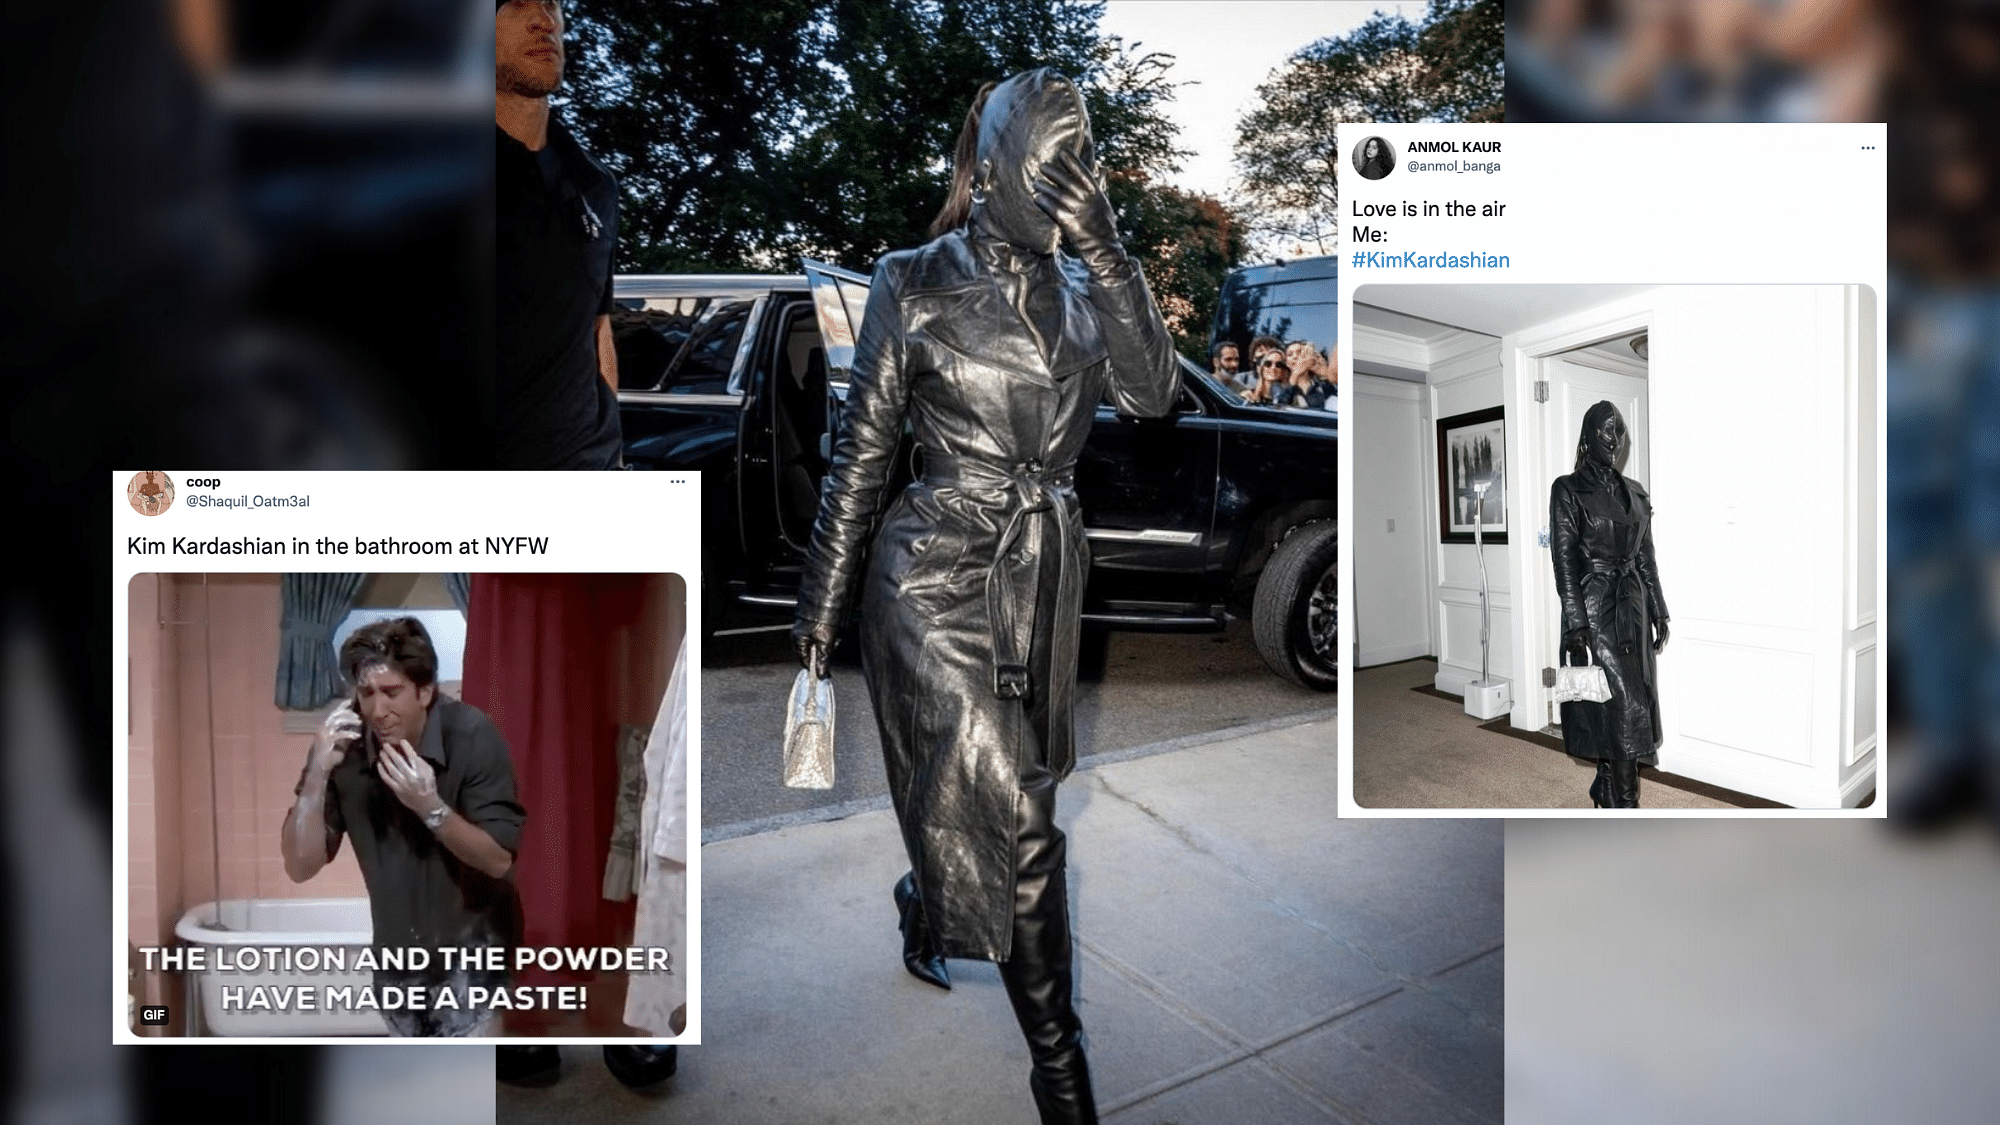 Kim Kardashian Fans Call for Fashion Conservator Over Tour Schedule Outfit